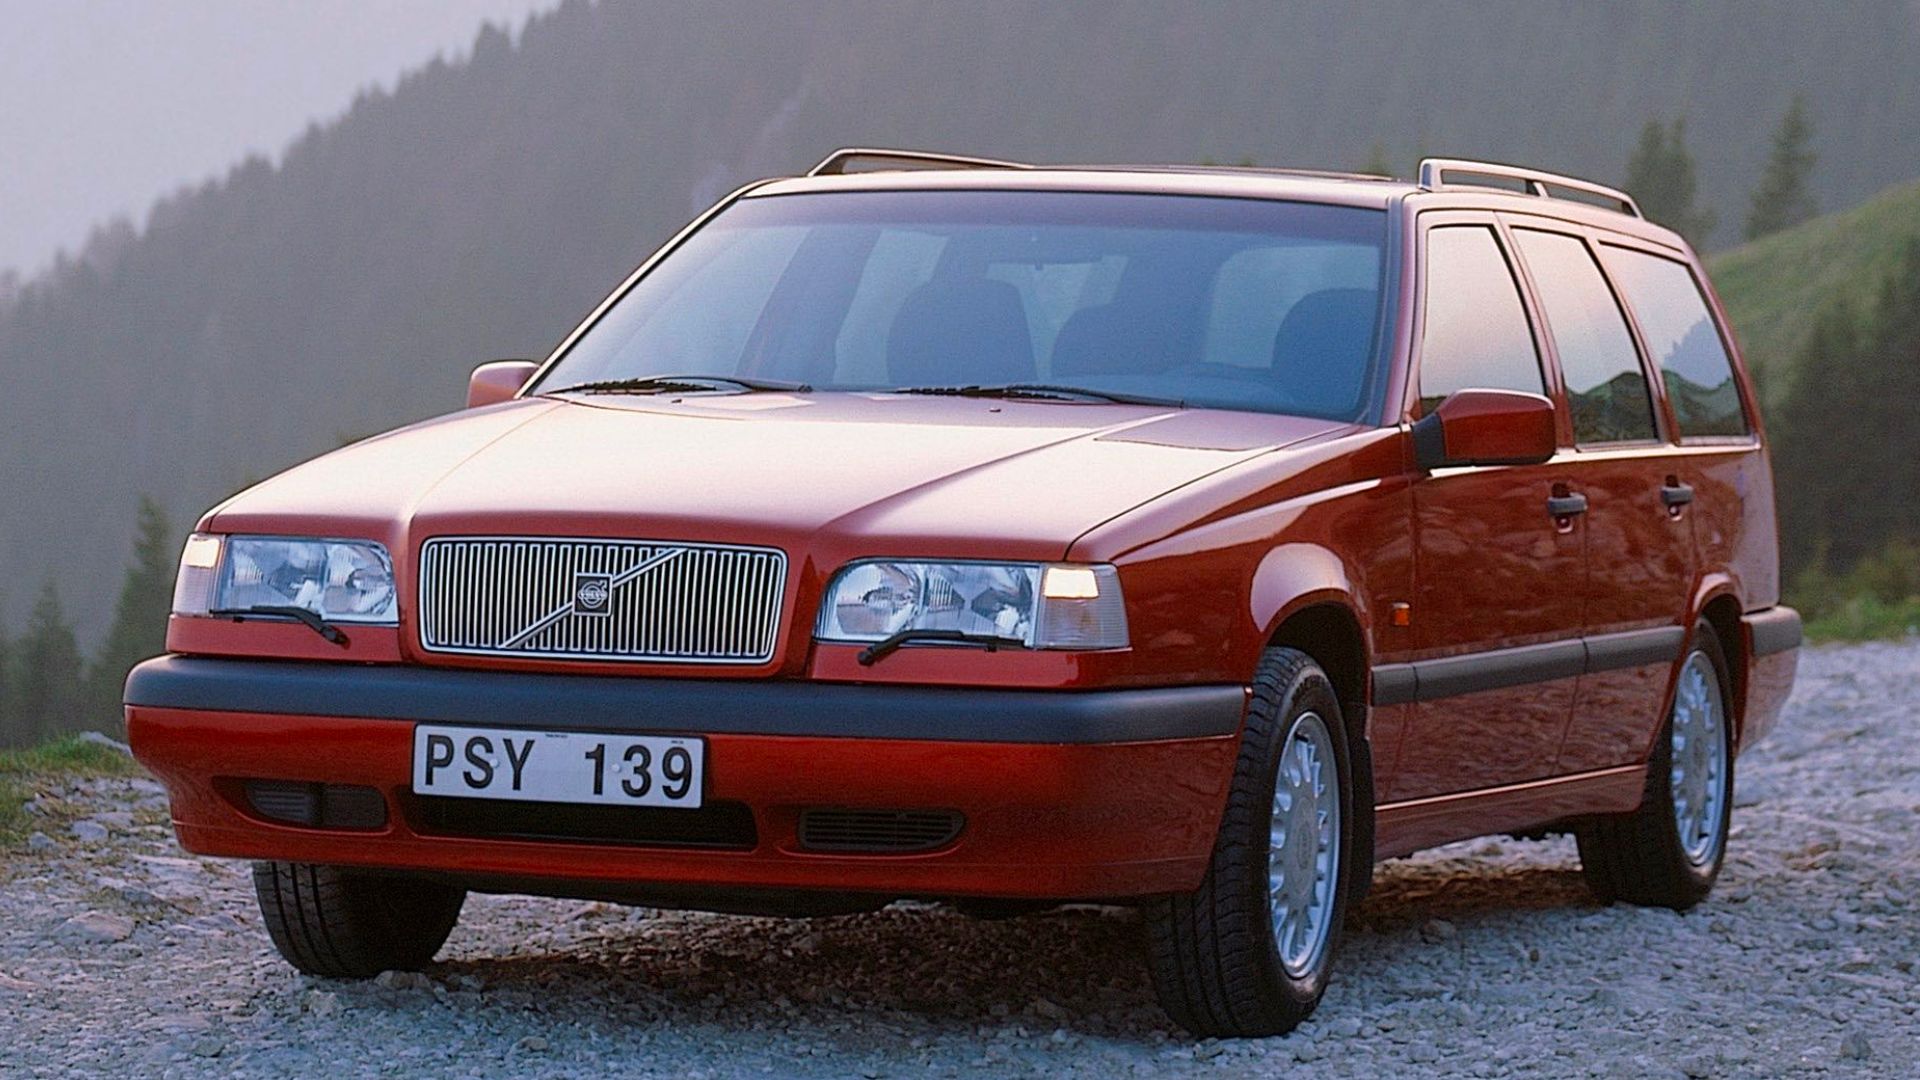 Cool project car options you must buy: Volvo 850 sedan or wagon P80